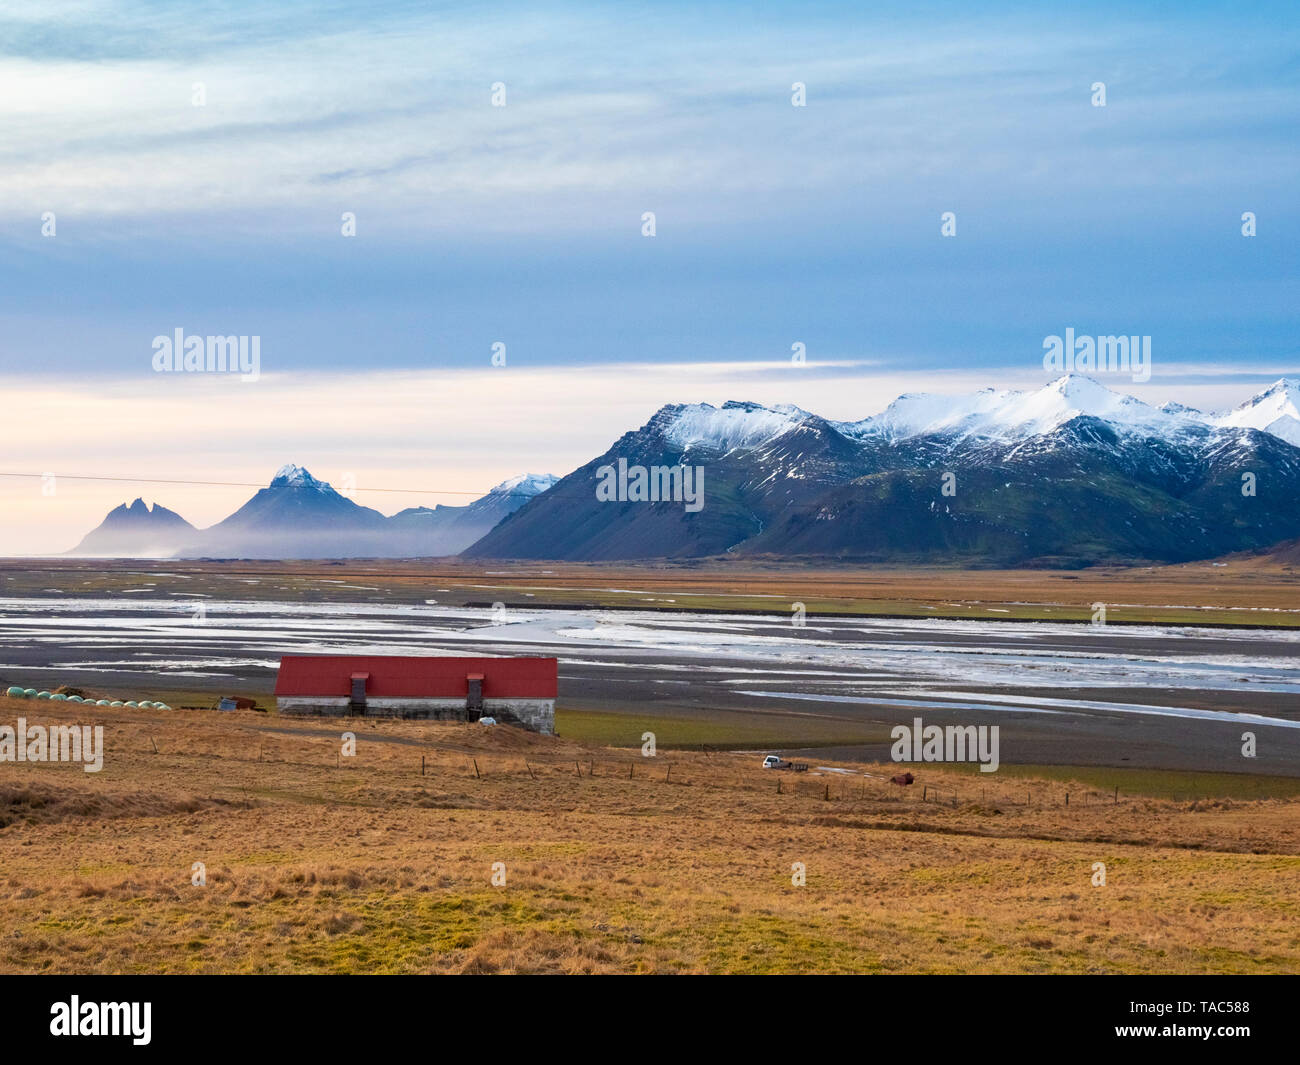 Iceland, Austurland, landscape with house and mountains on the way to Egilsstadir Stock Photo